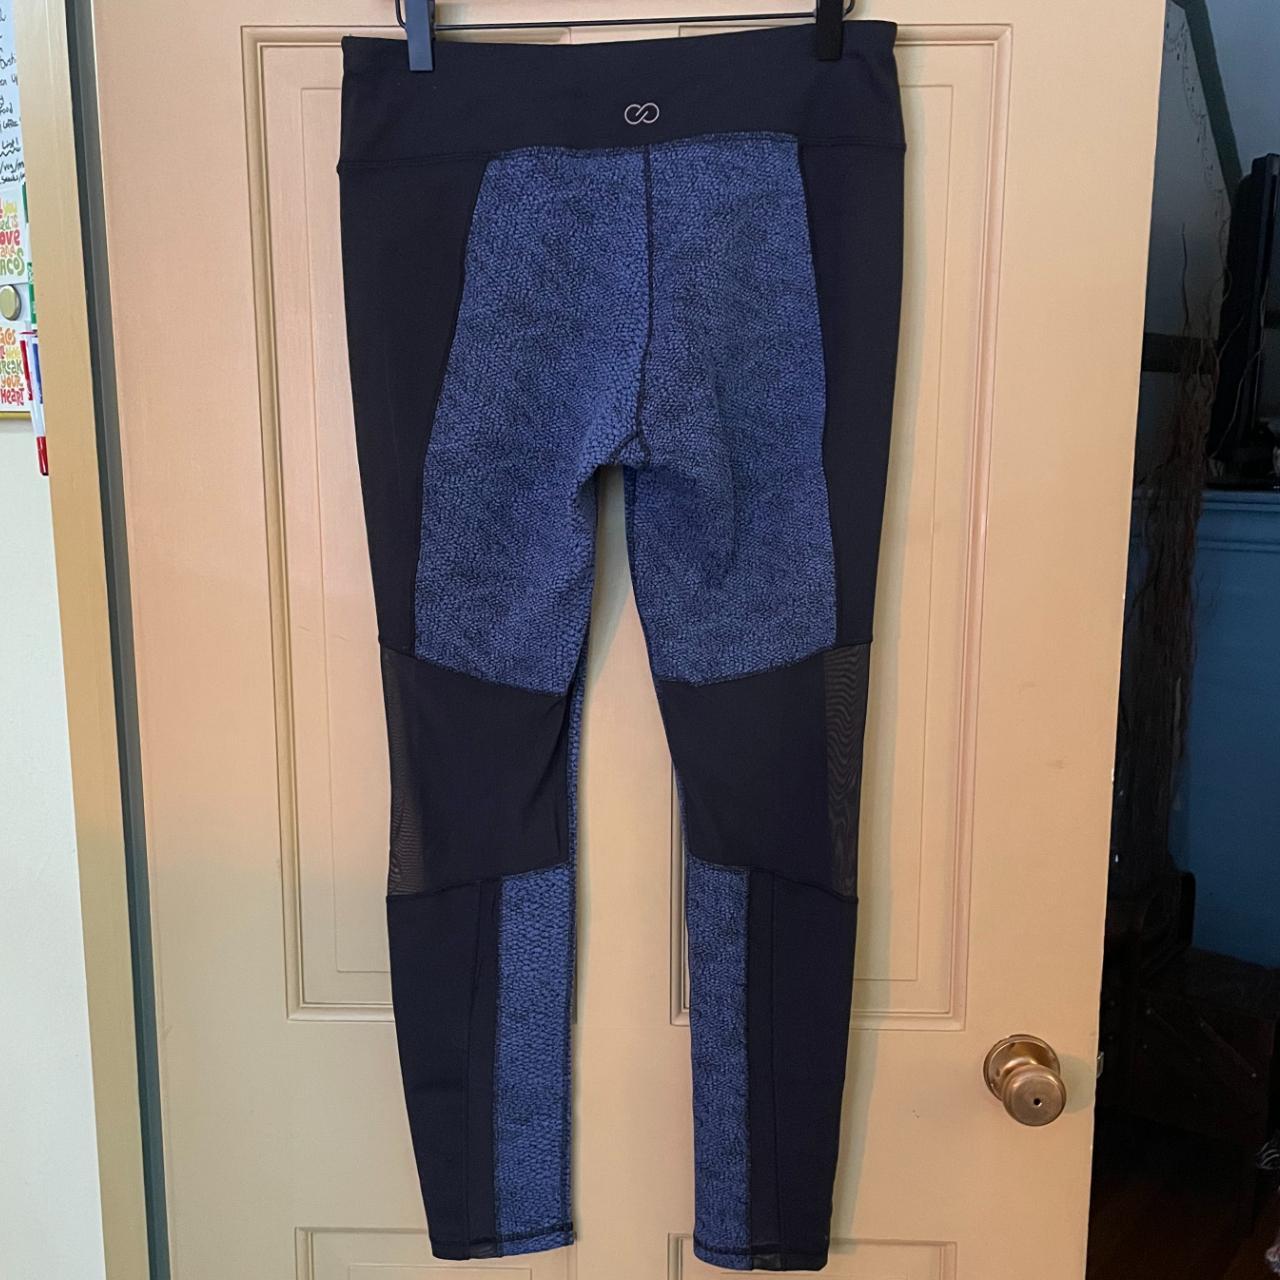 CALIA by Carrie Underwood Leggings Size Small Good - Depop